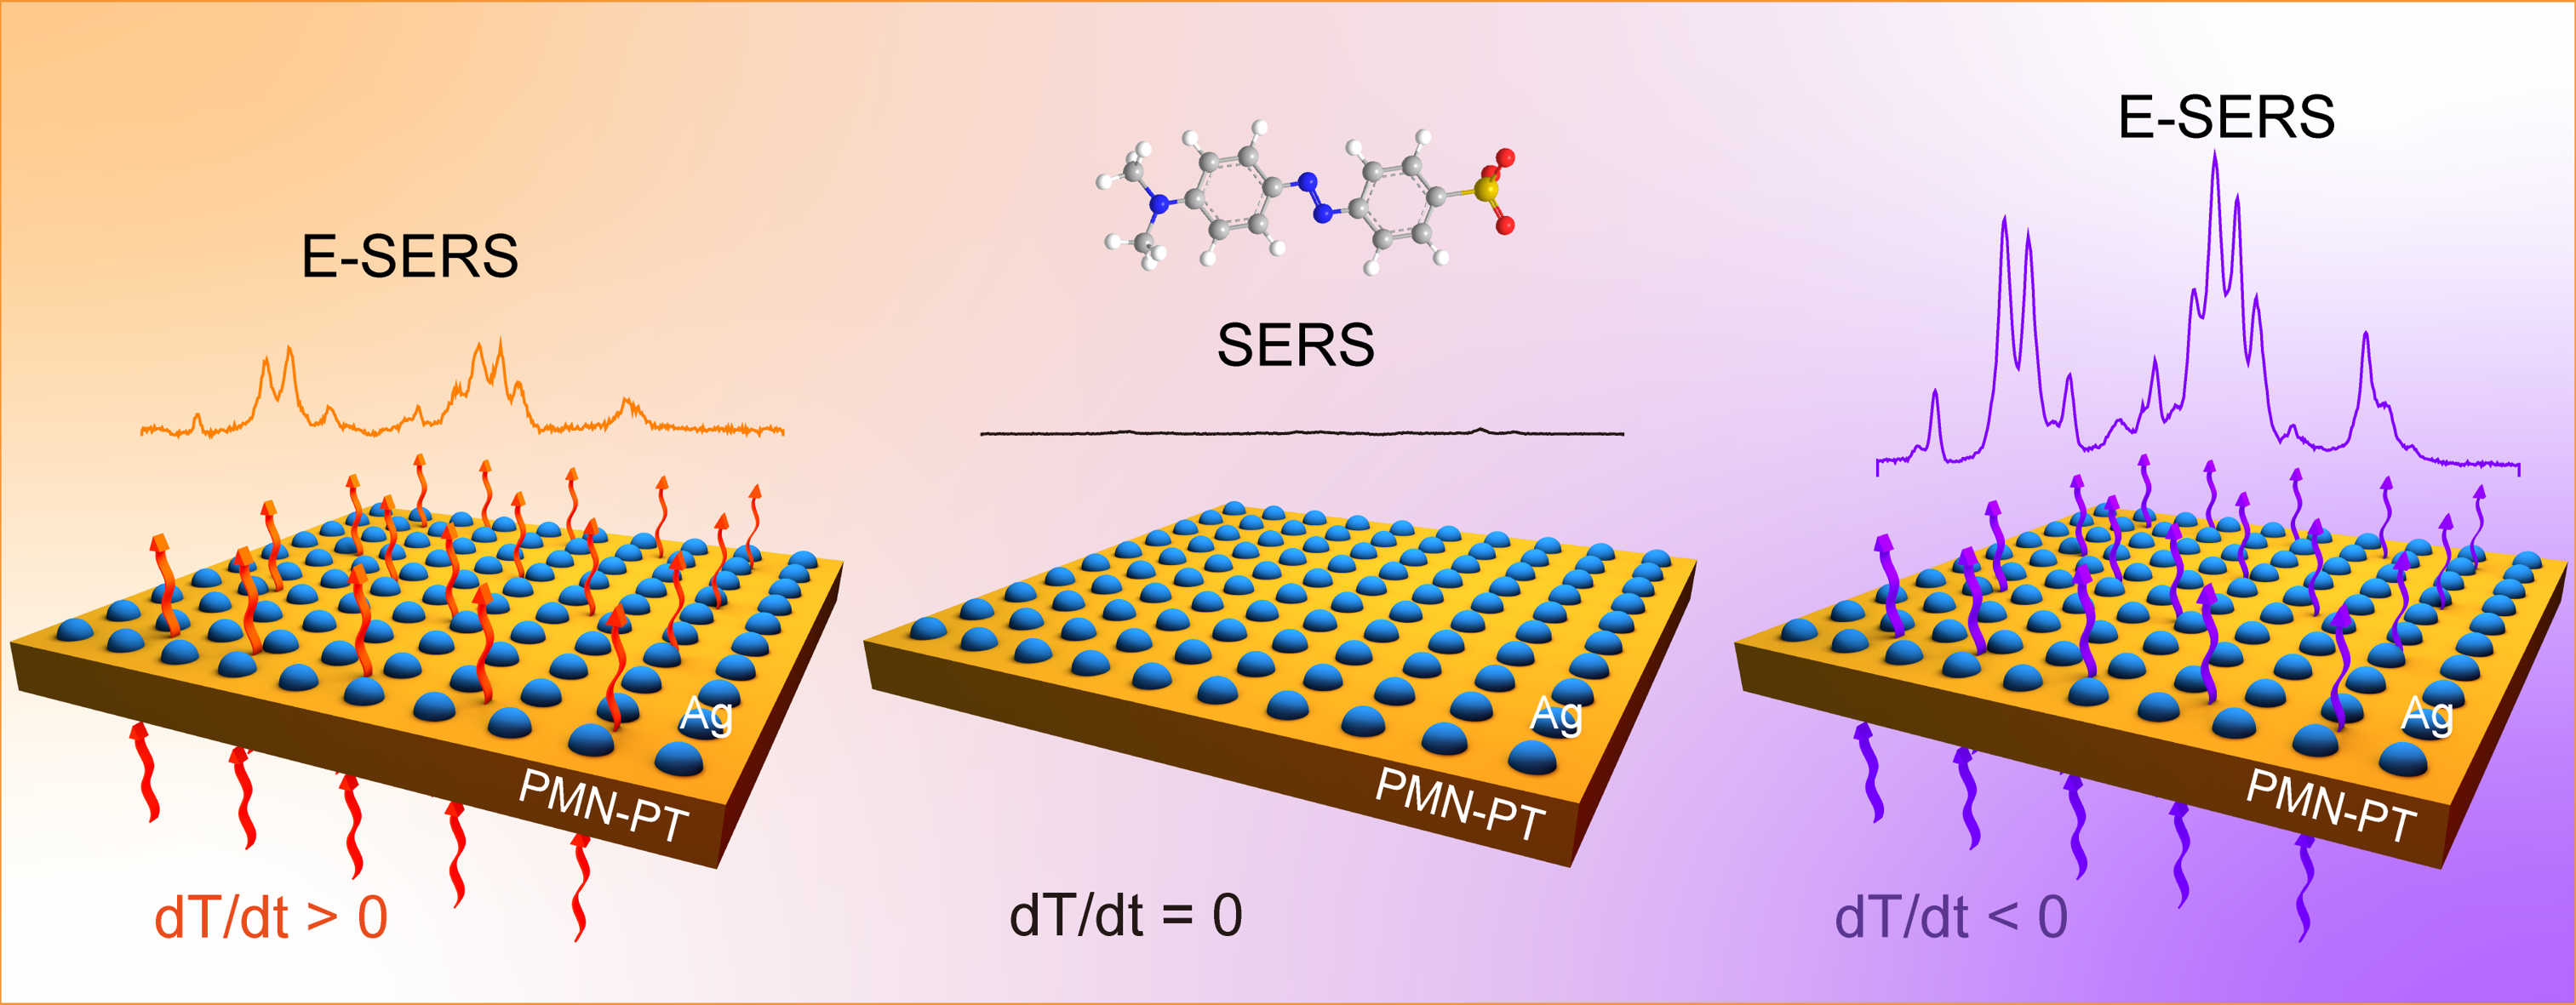 Schematic depiction of the SERS substrate based on a pyroelectric material and silver nanoparticles.